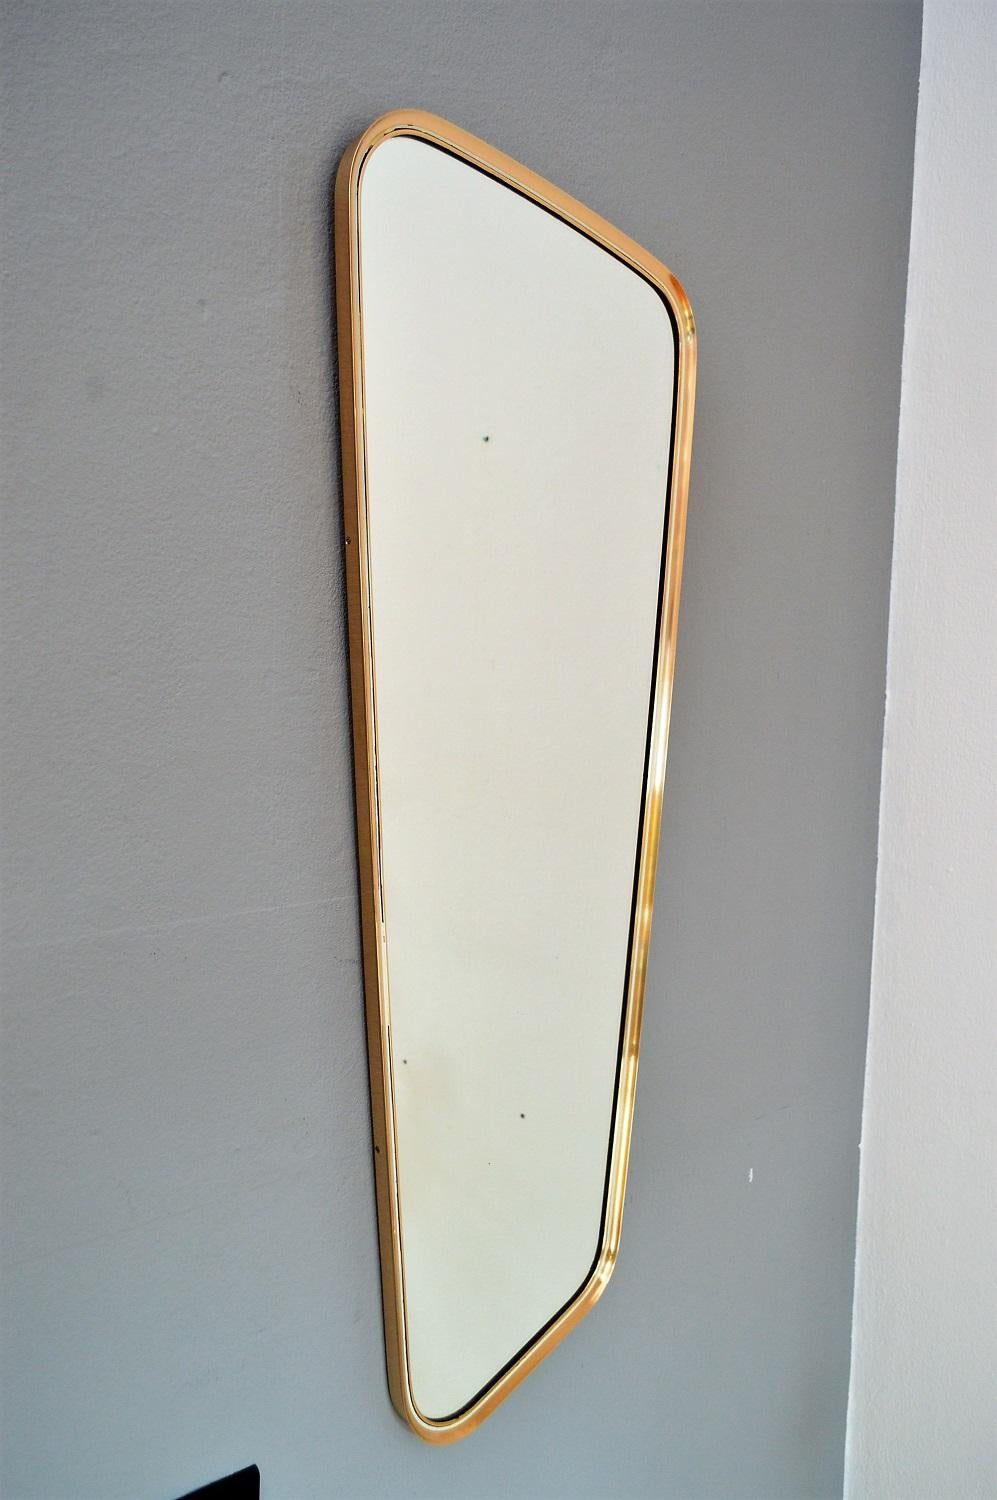 Beautiful and elegant long wall mirror made of full polished brass with the typical design form of the Germany's 1950s.
Made by Vereinigte Werkstätten München in the 1970s.
The brass frame is in perfect order and of high level of craftsmanship